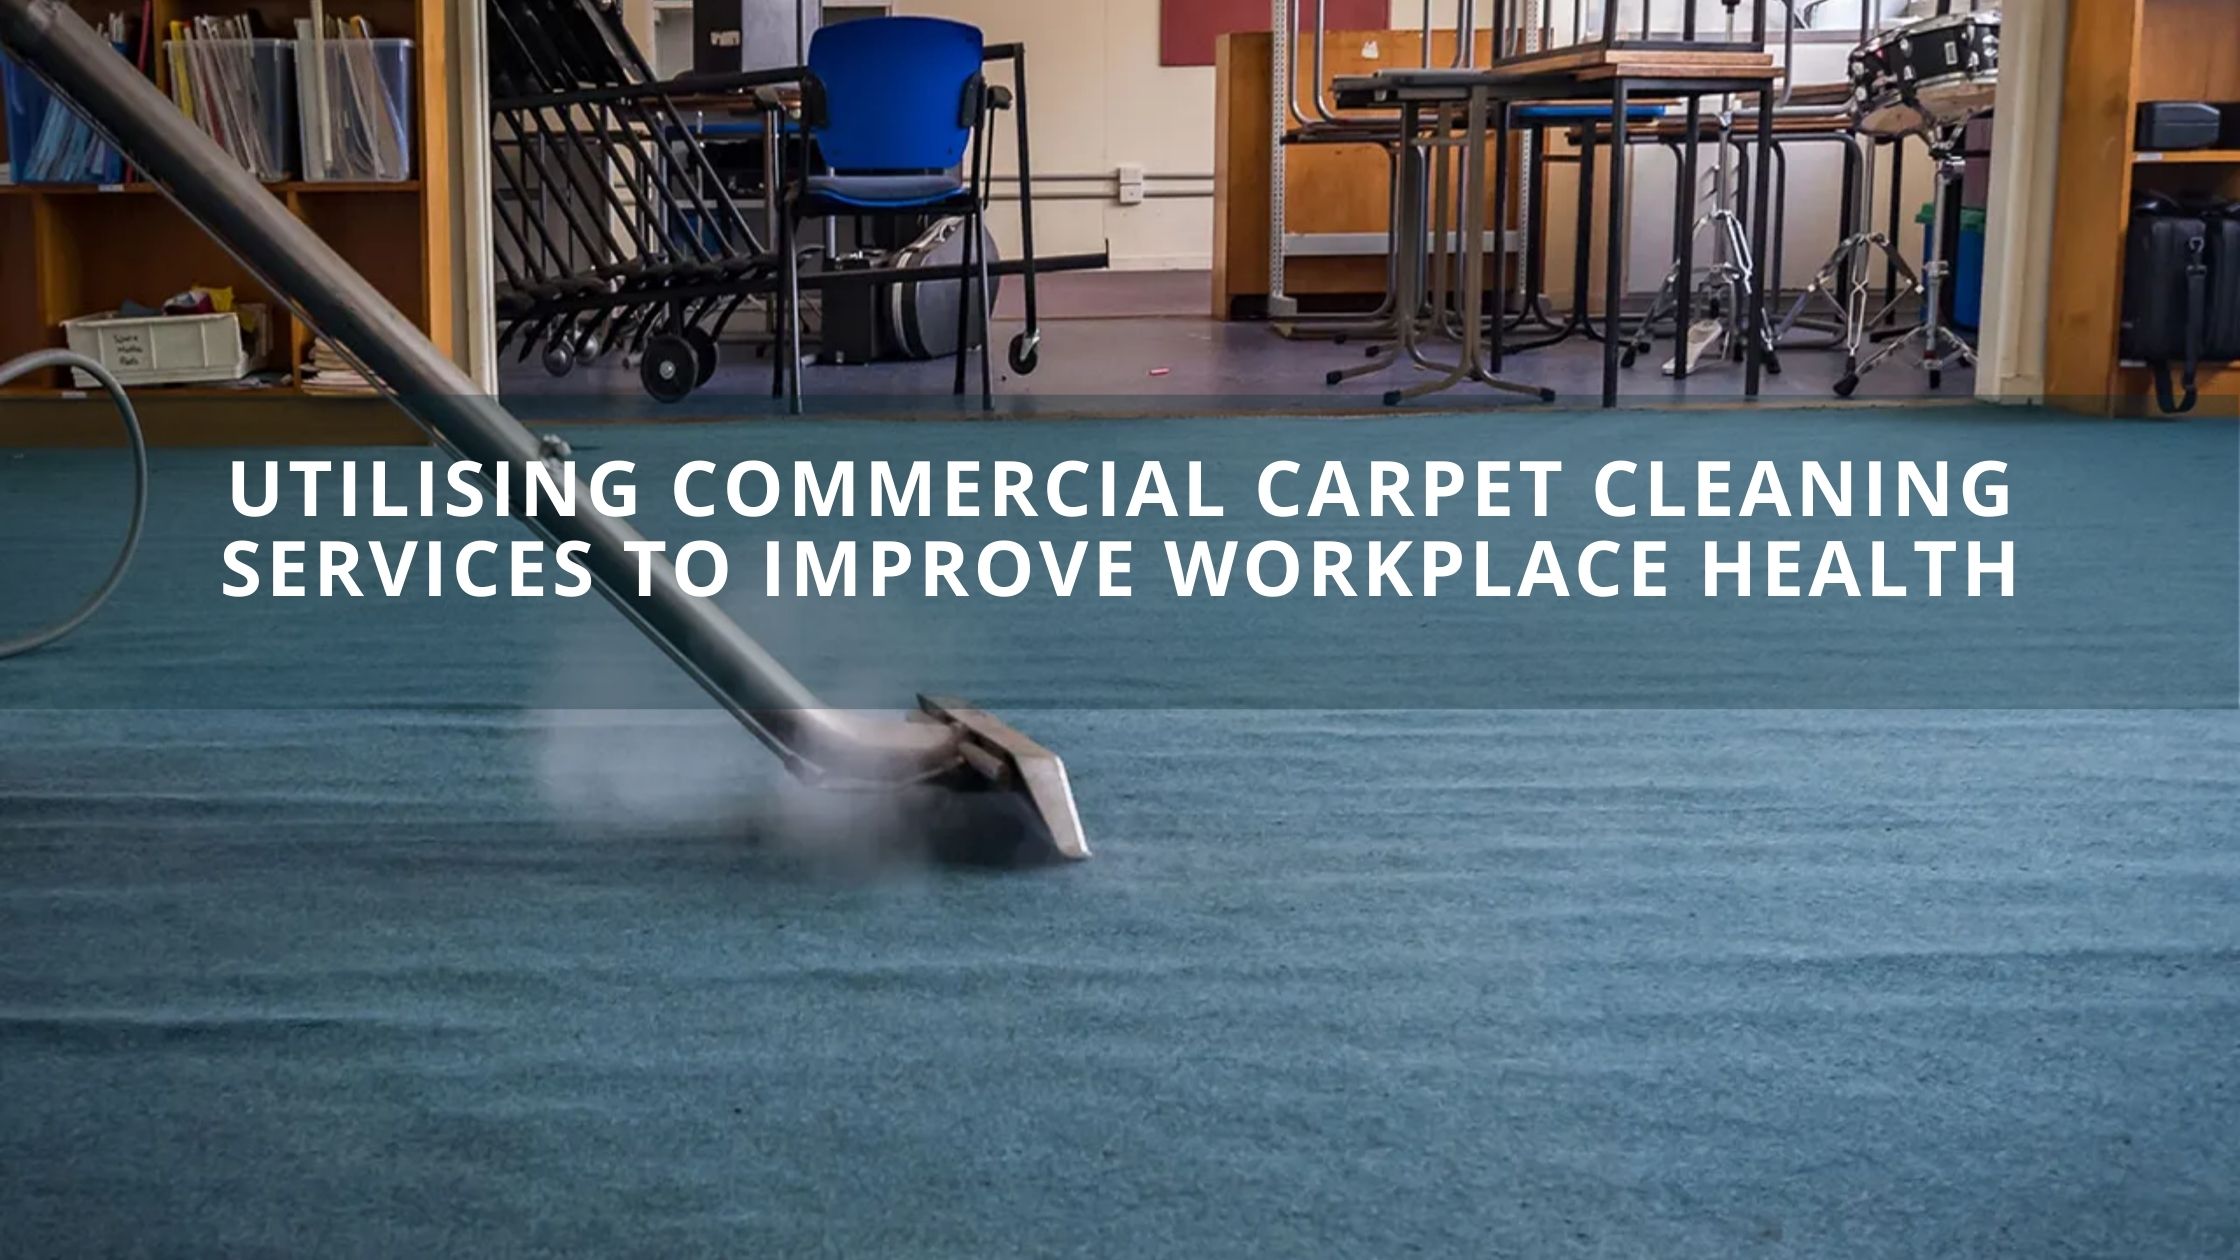 Utilising Commercial Carpet Cleaning Services to Improve Workplace Health